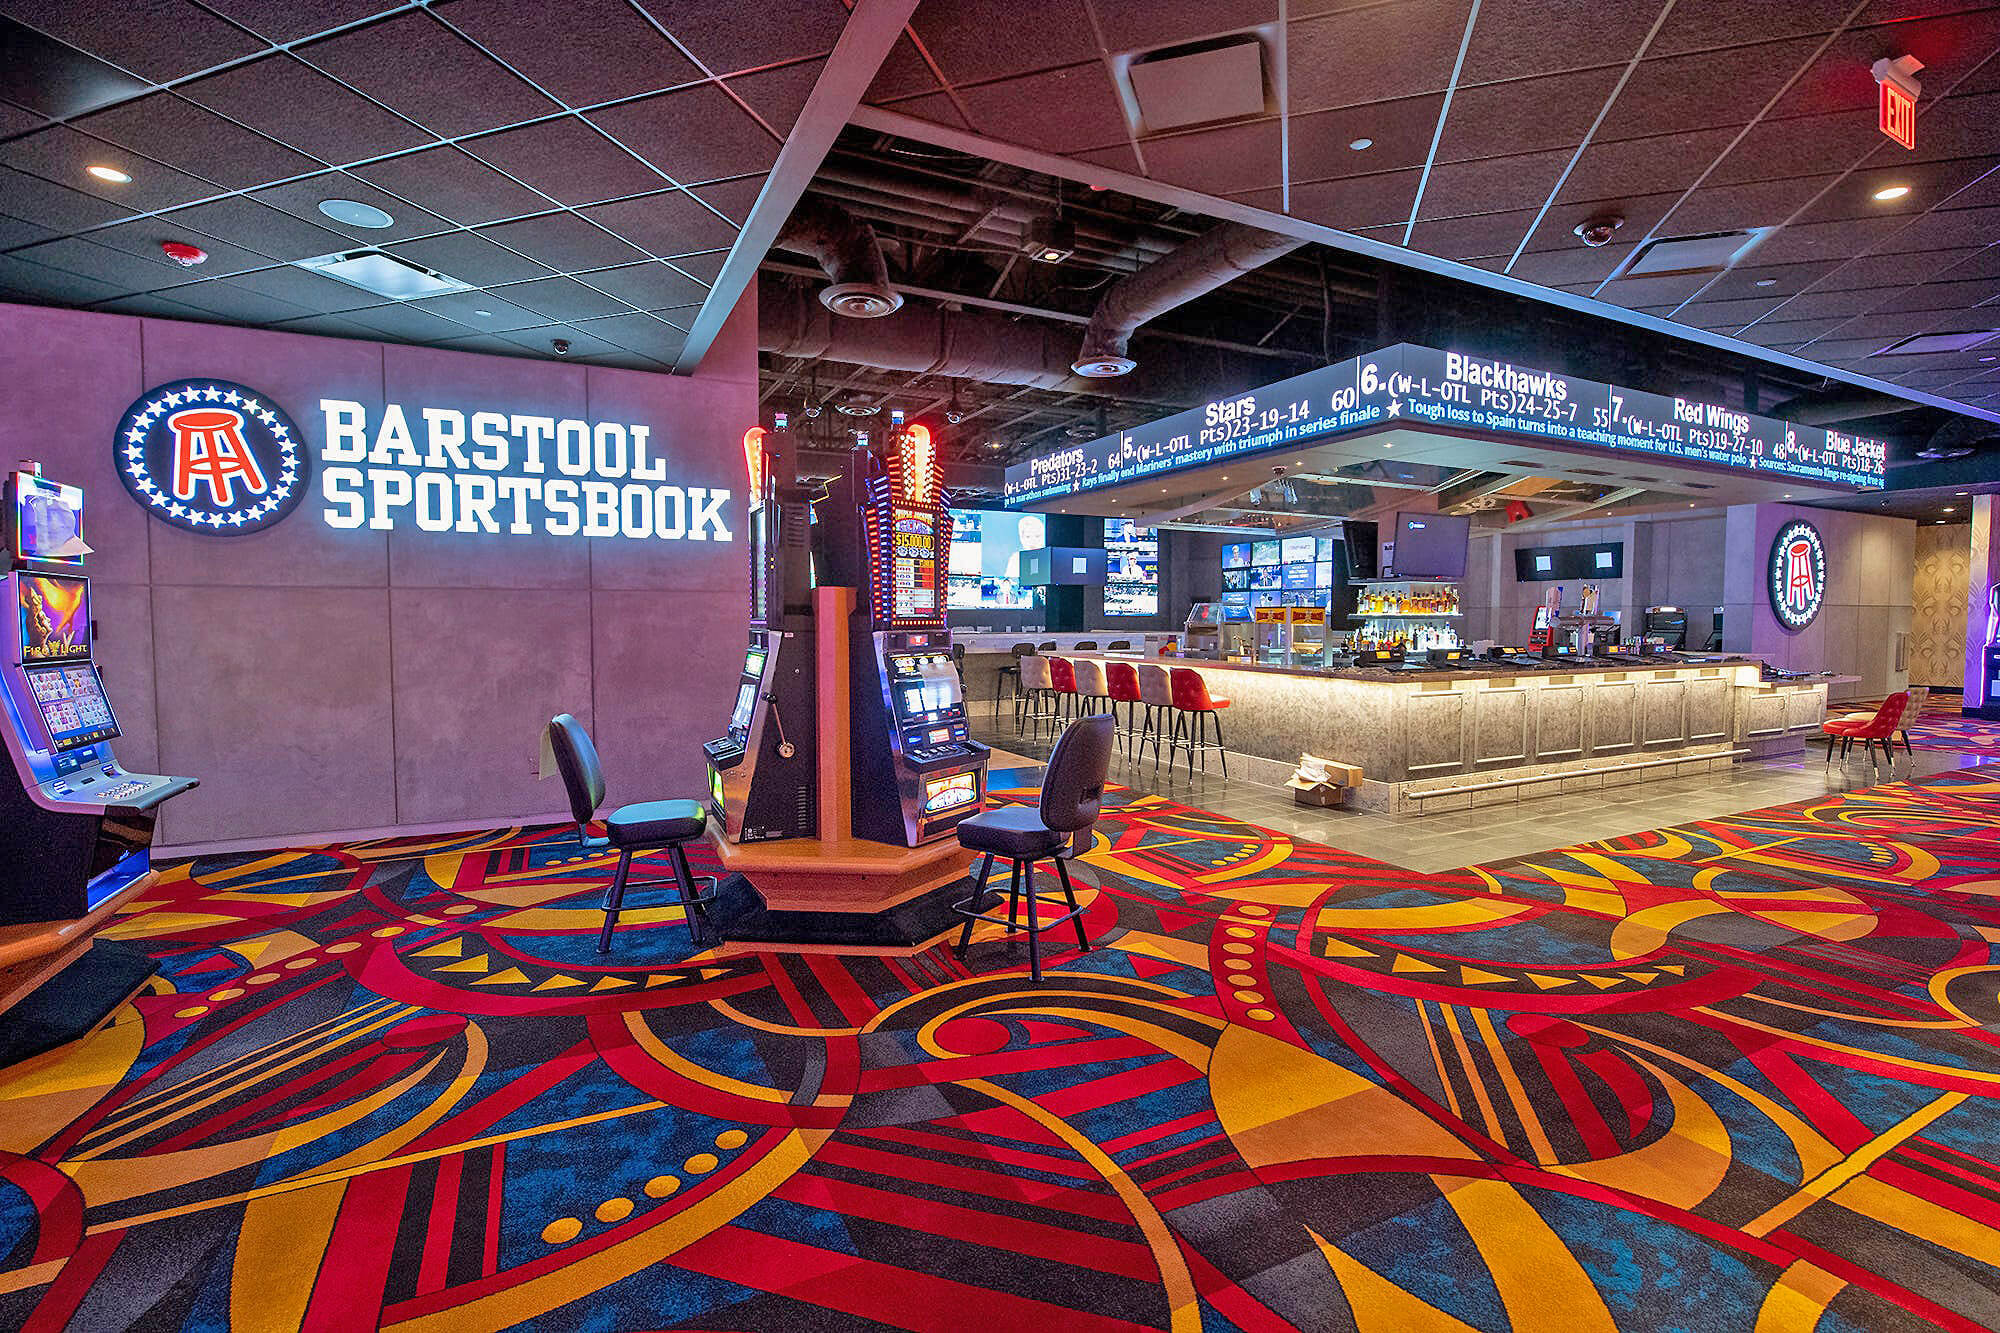 How To Bet - Ohio Sports Betting: Owners of Barstool Sportsbook, Football HOF Village, Apply for Licenses